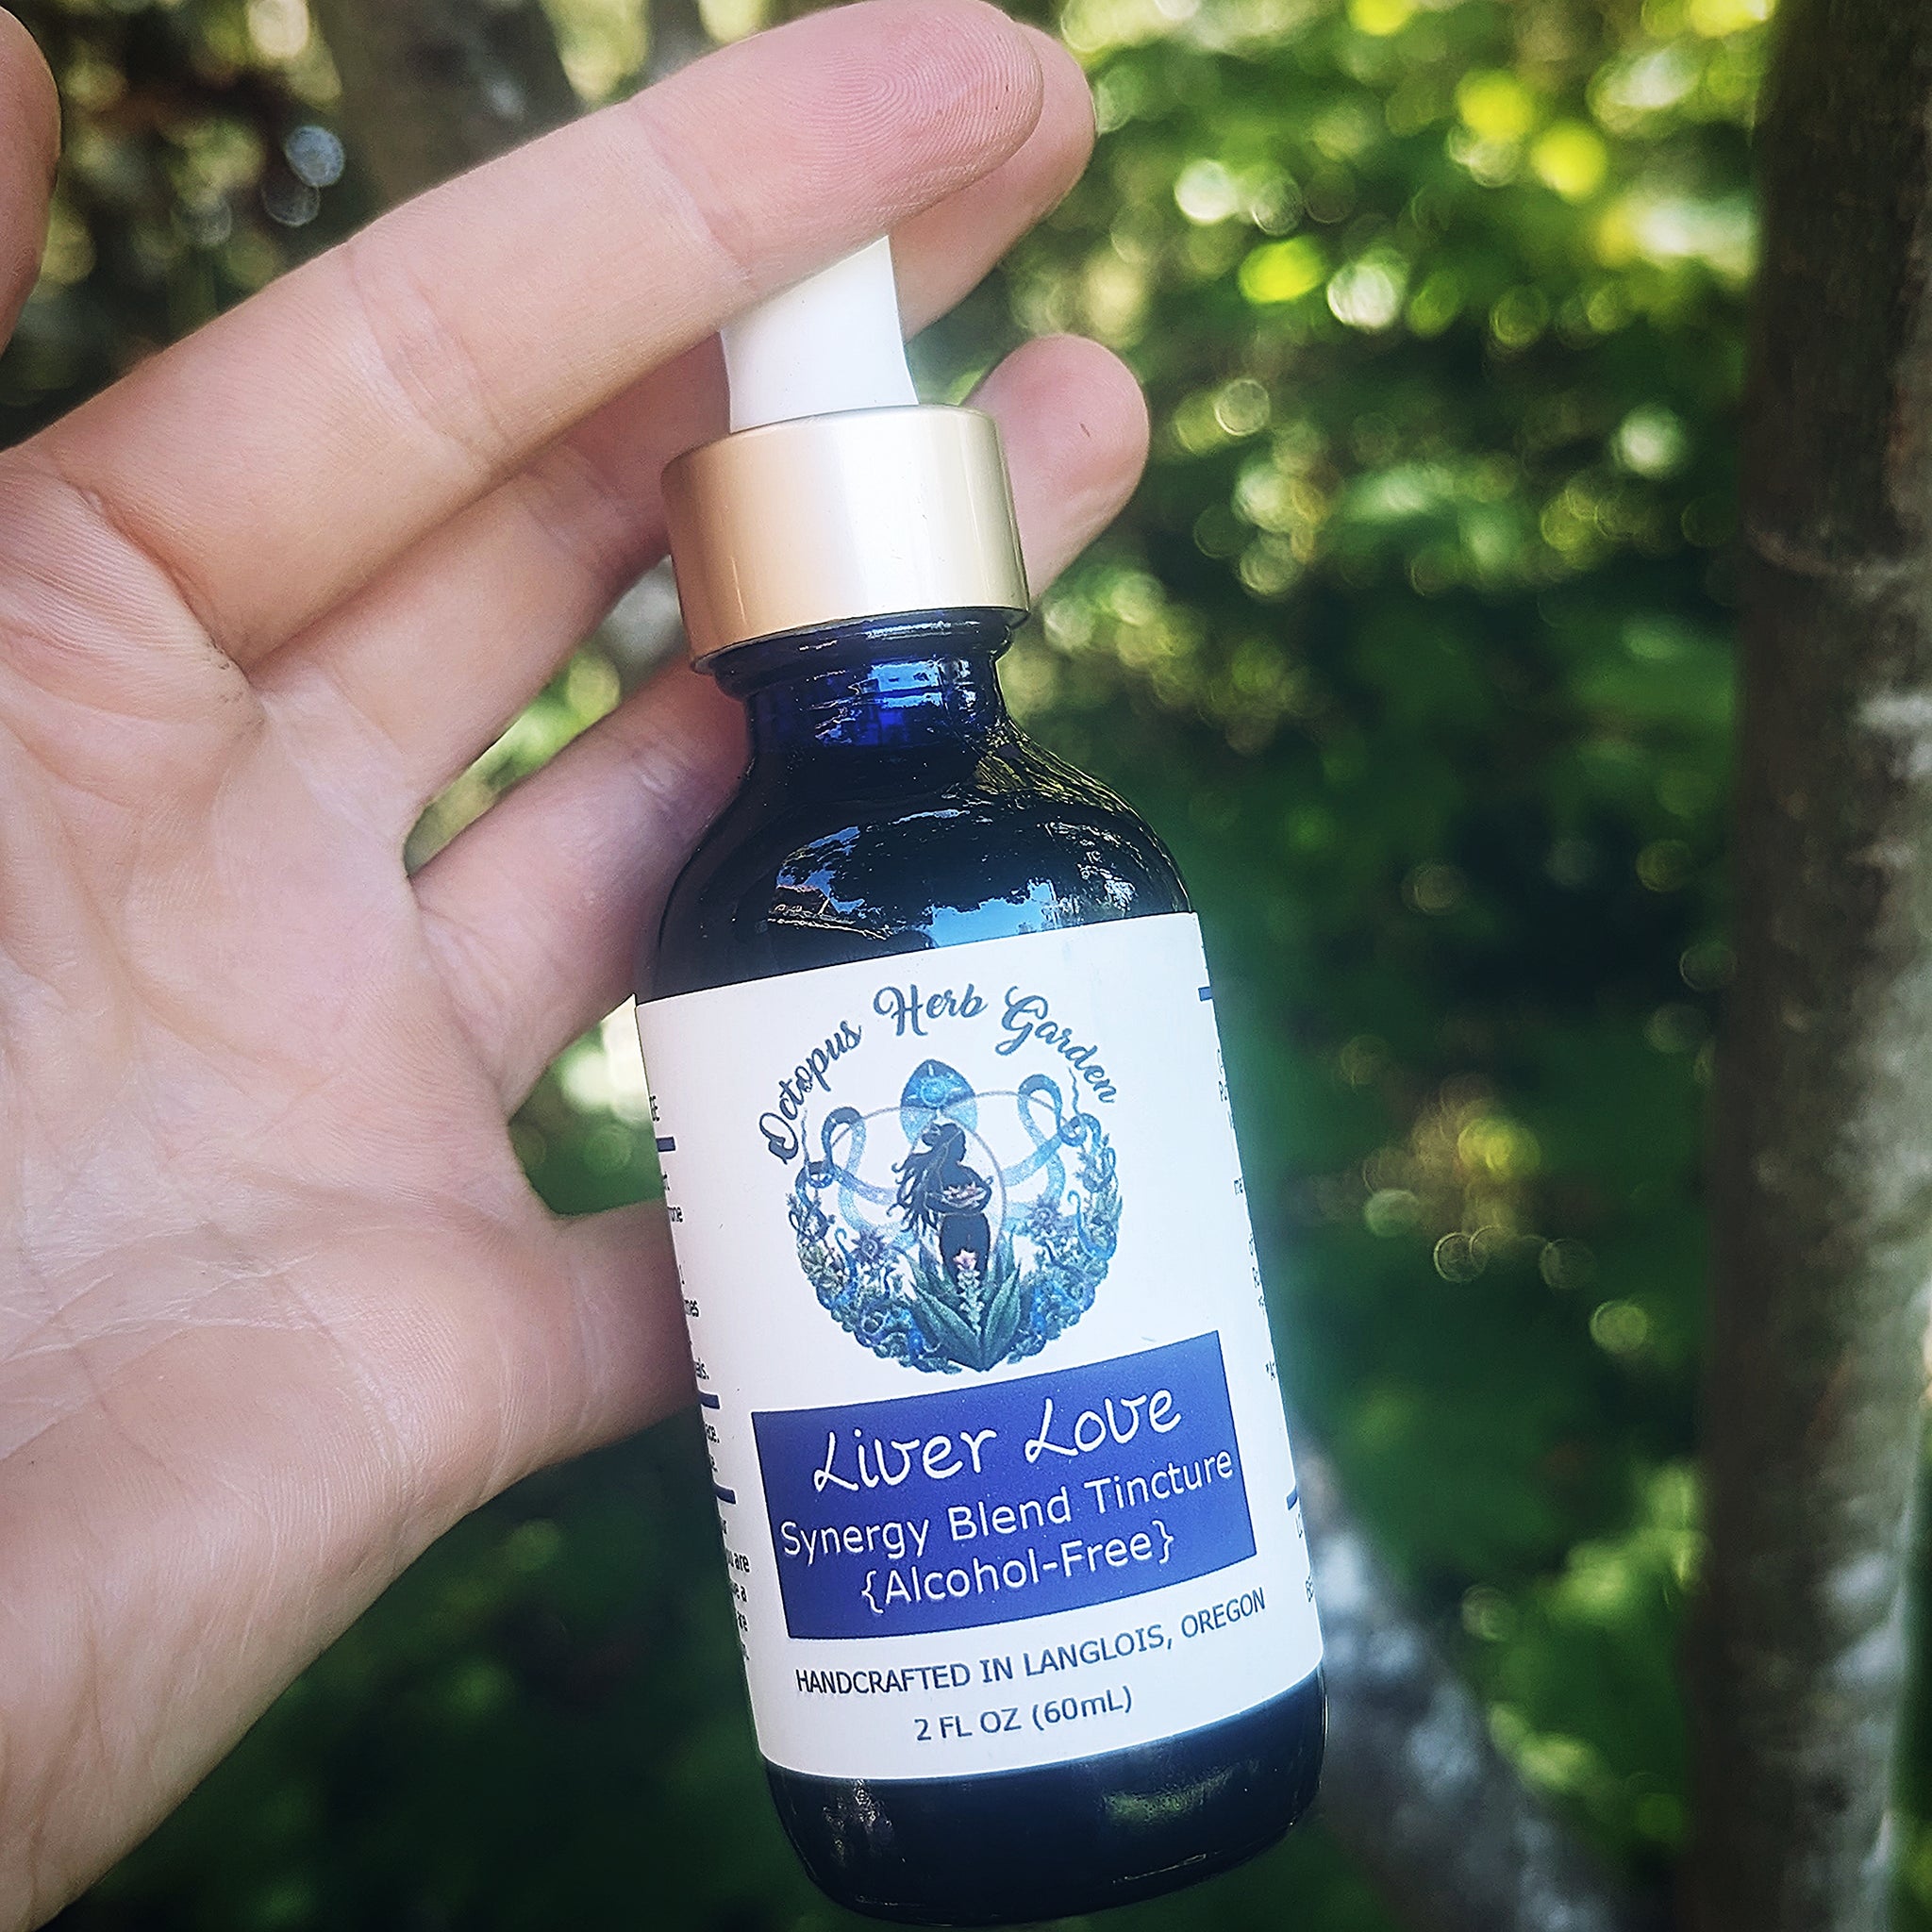 Liver Love Synergy Blend Tincture (Alcohol-Free)